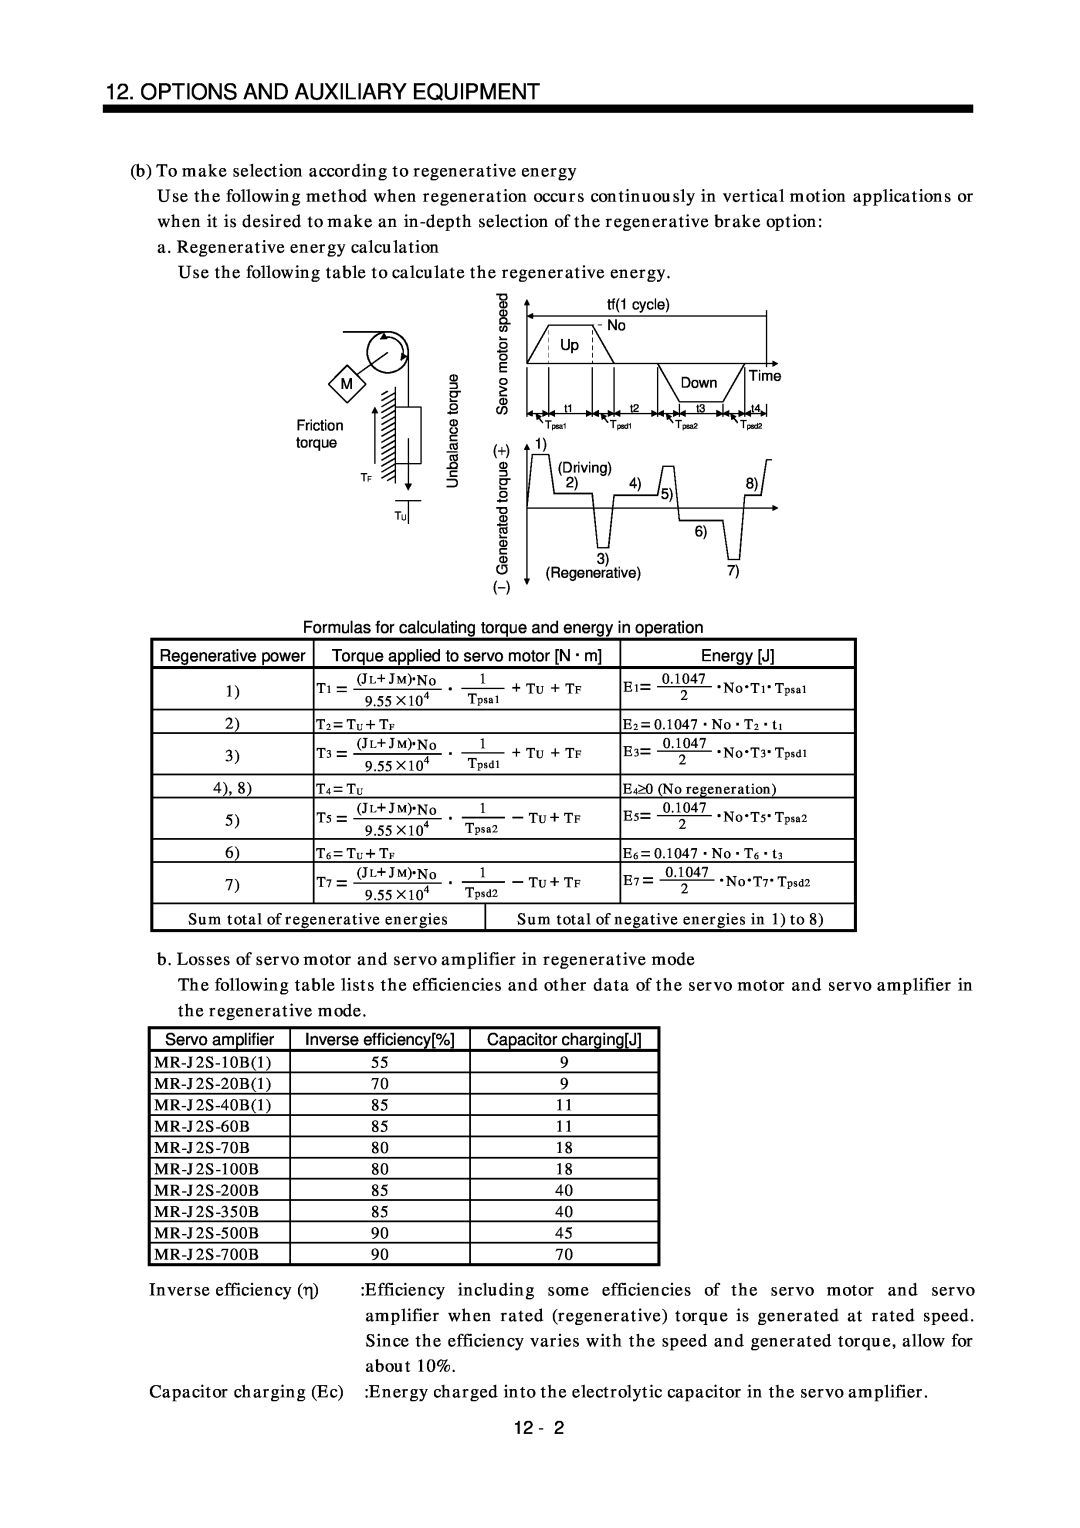 Bose MR-J2S- B instruction manual Options And Auxiliary Equipment, a. Regenerative energy calculation 